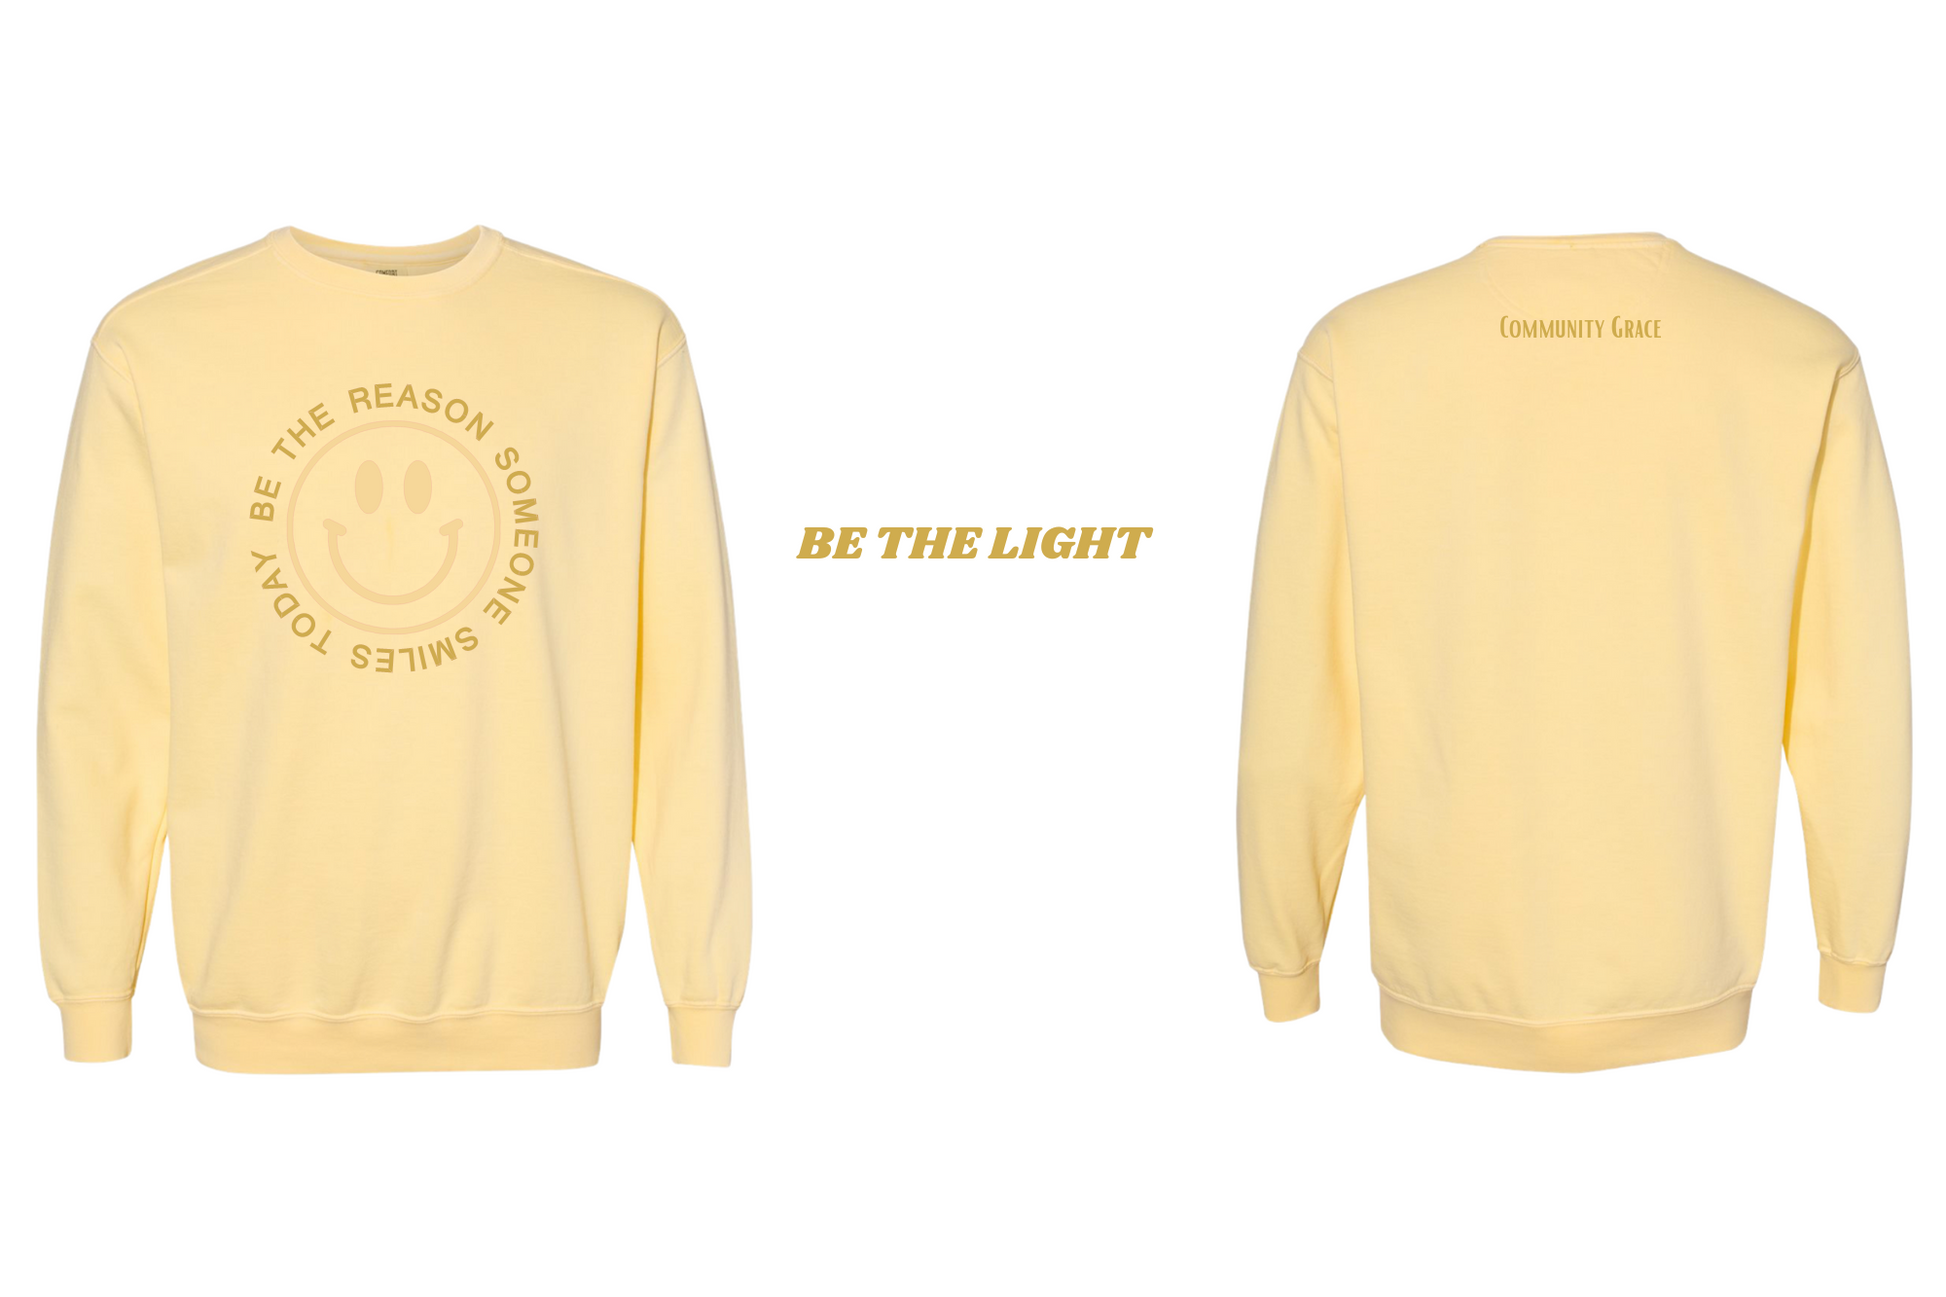 yellow crewneck sweatshirt with a smiley face in a vibrant yellow tone with the words "BE THE REASON SOMEONE SMILES TODAY" around it in capital letters in a gold tone on the front of the sweatshirt. On the back of the sweatshirt is Community Grace in a gold tone. The inner left sleeve of the sweatshirt has the affirmation "Be The Light"